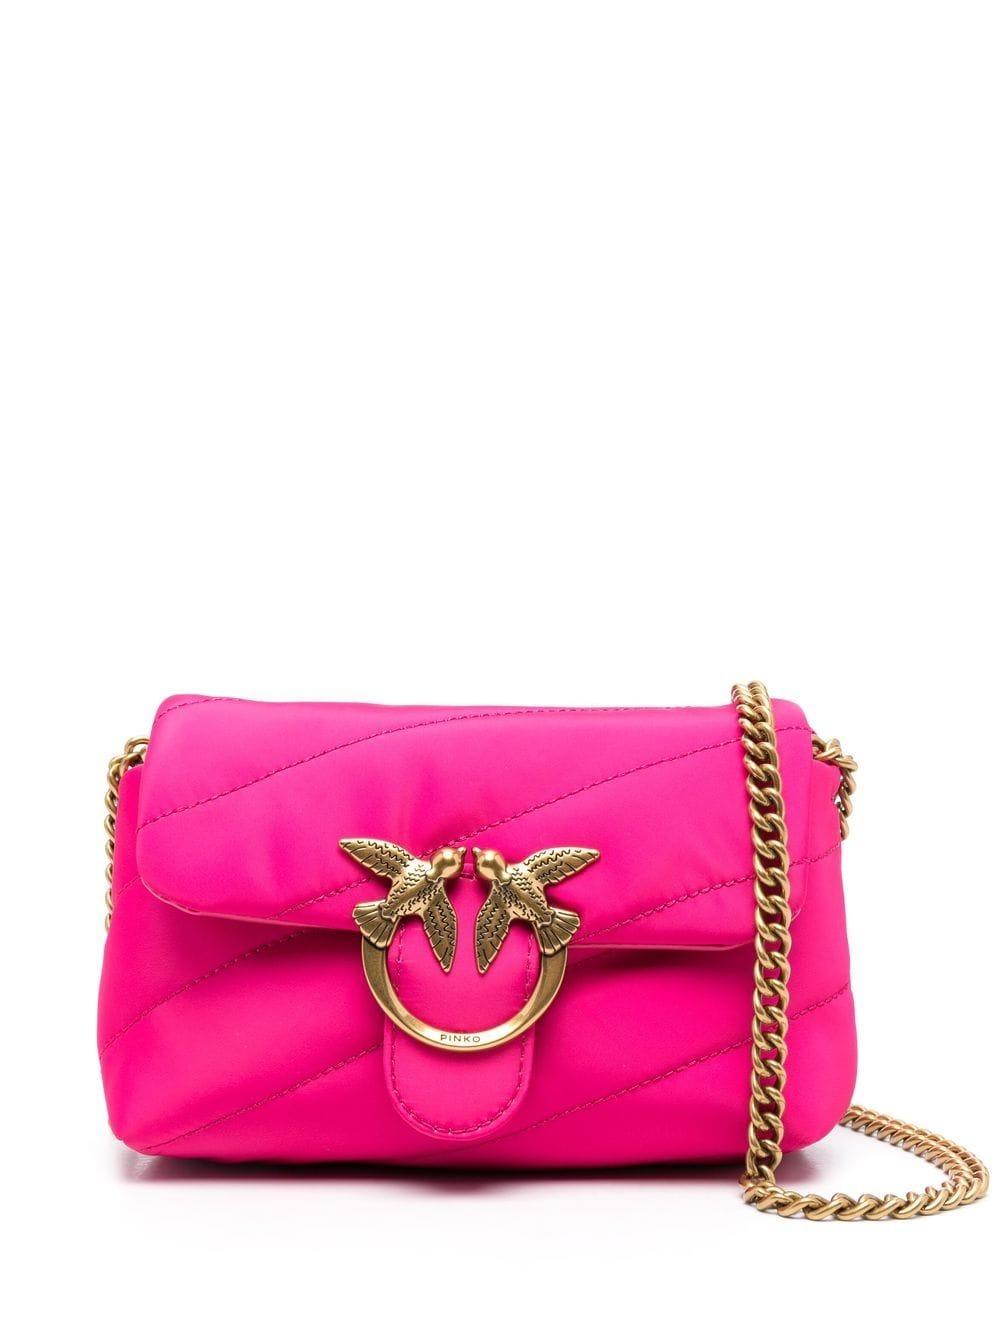 Pinko Love Satin Quilted Shoulder Bag in Pink | Lyst